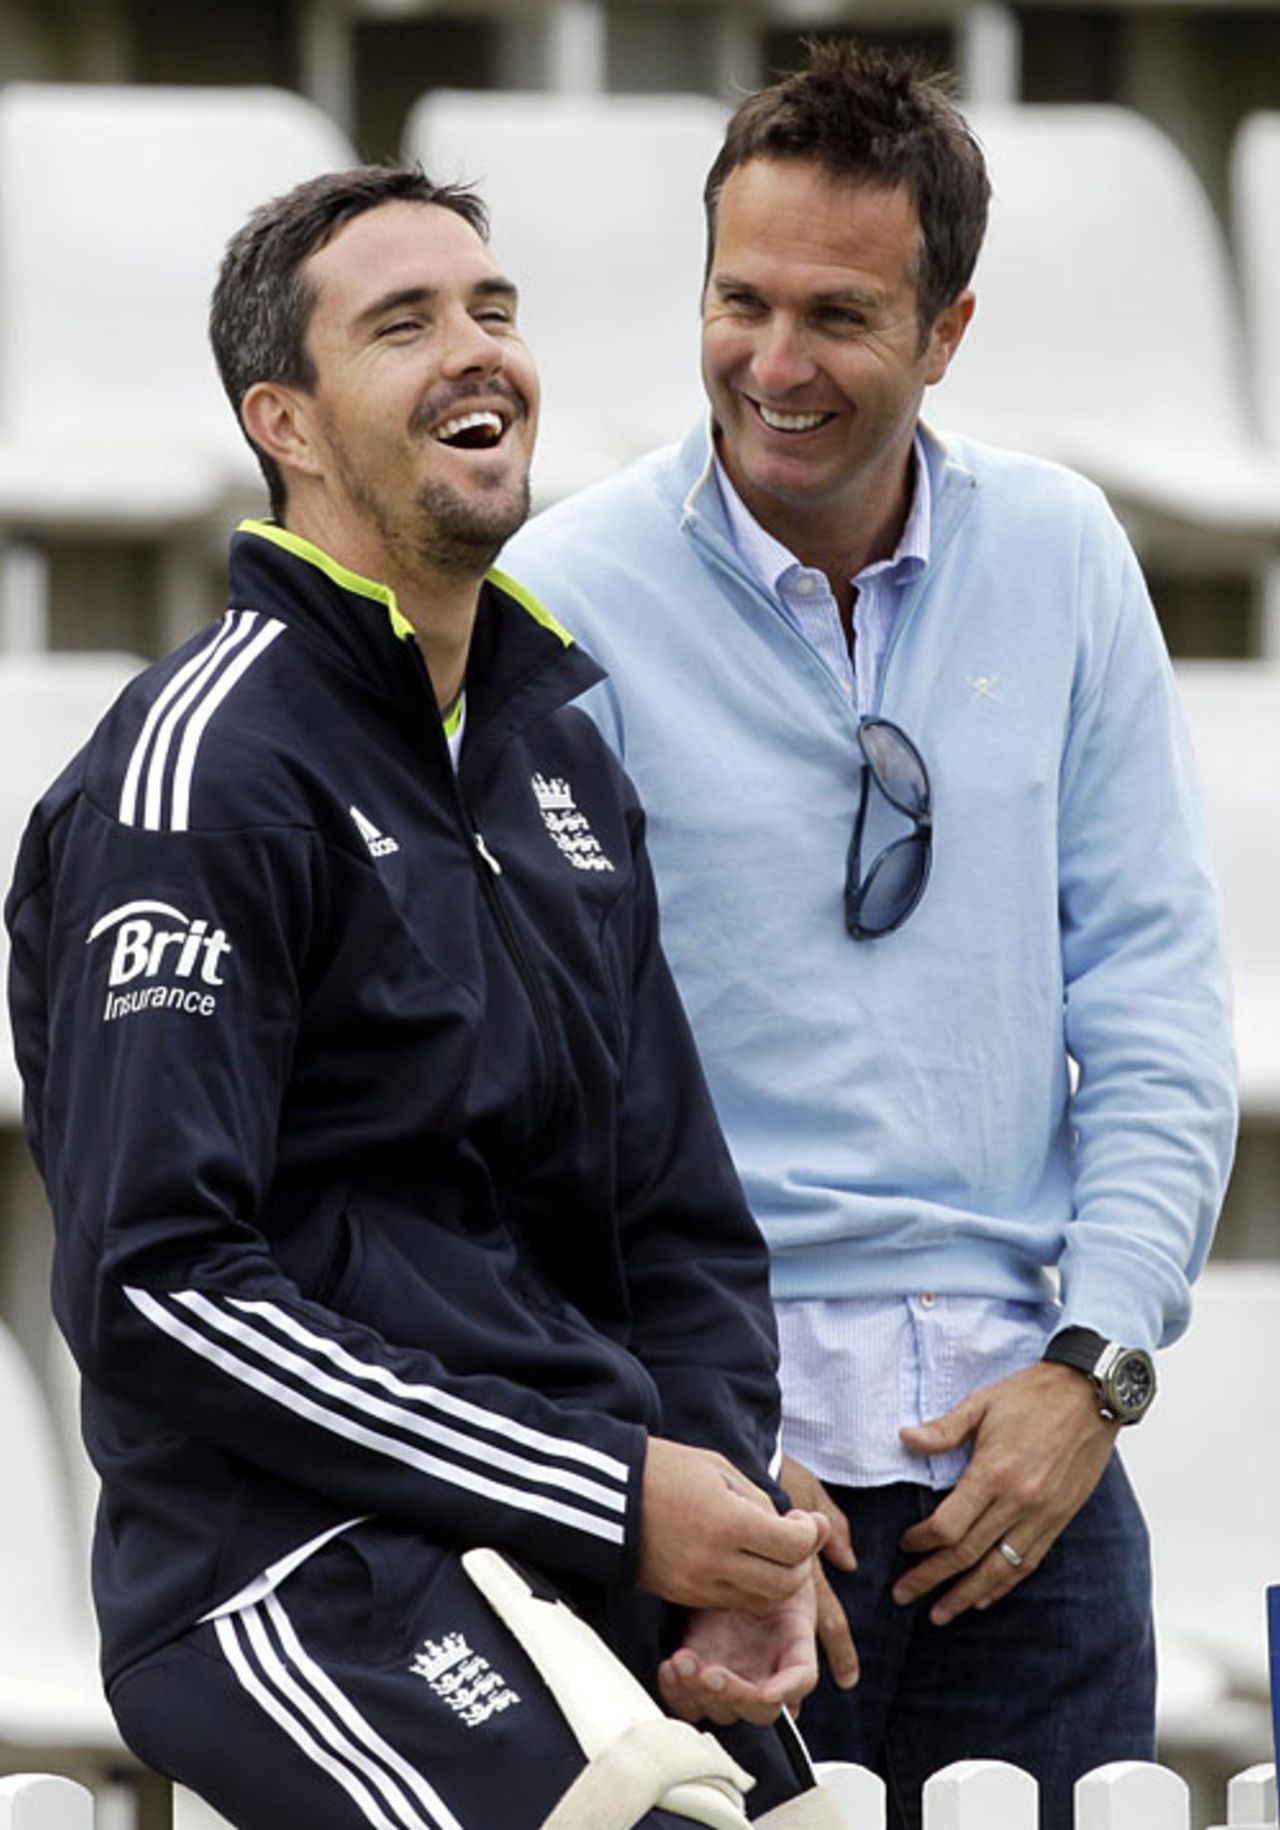 Kevin Pietersen shares a joke with former England captain Michael Vaughan, Lord's, May 26, 2010